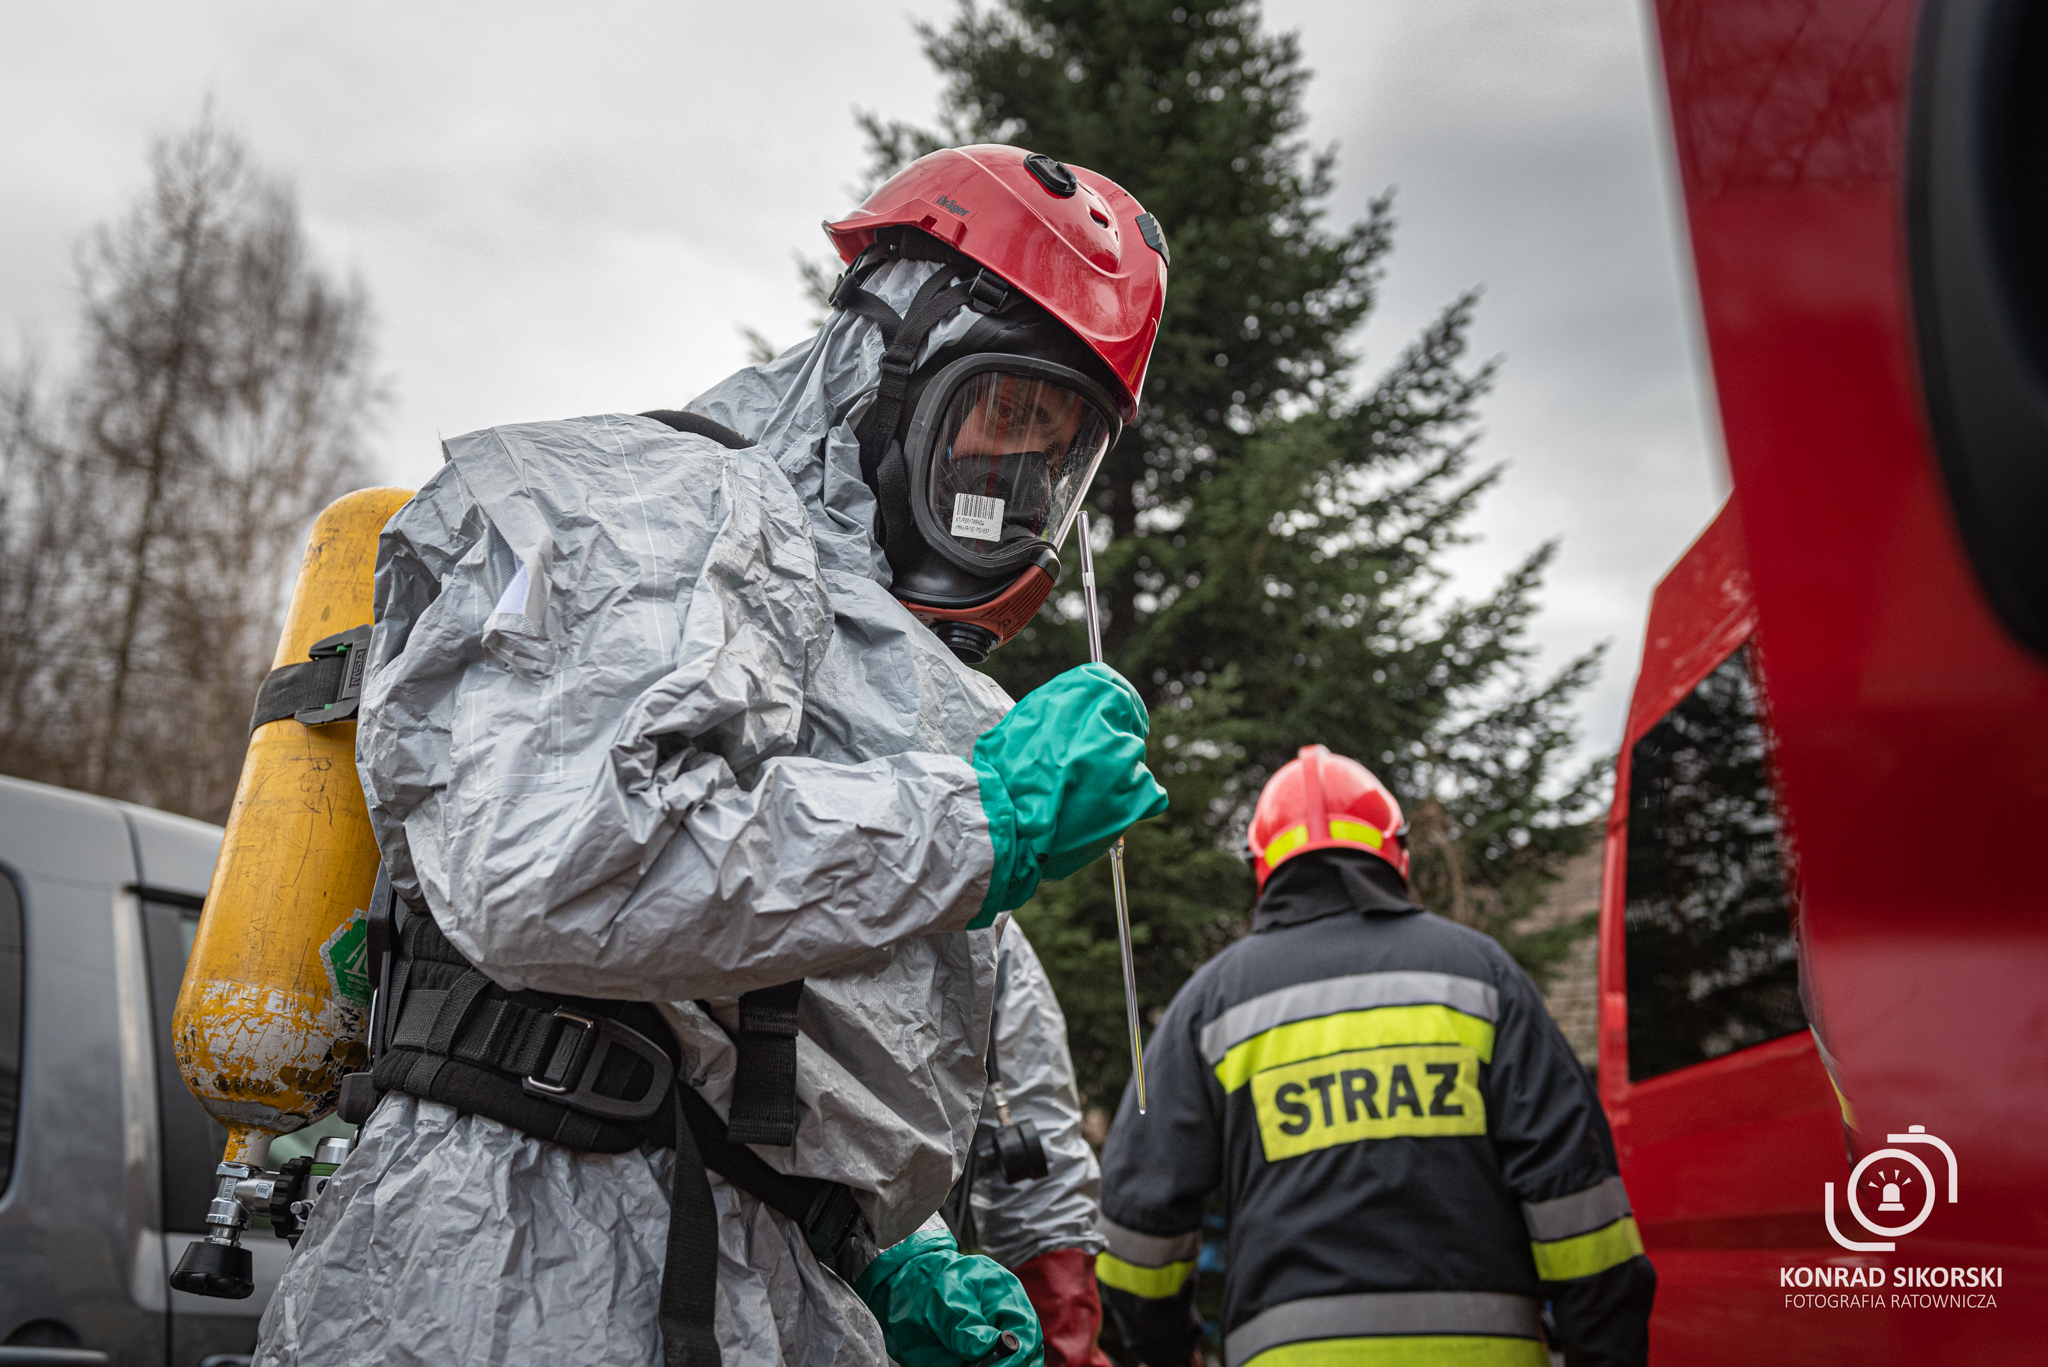 Specialized Chemical and Environmental Rescue Group “TARNÓW 1” – Remiza.pl